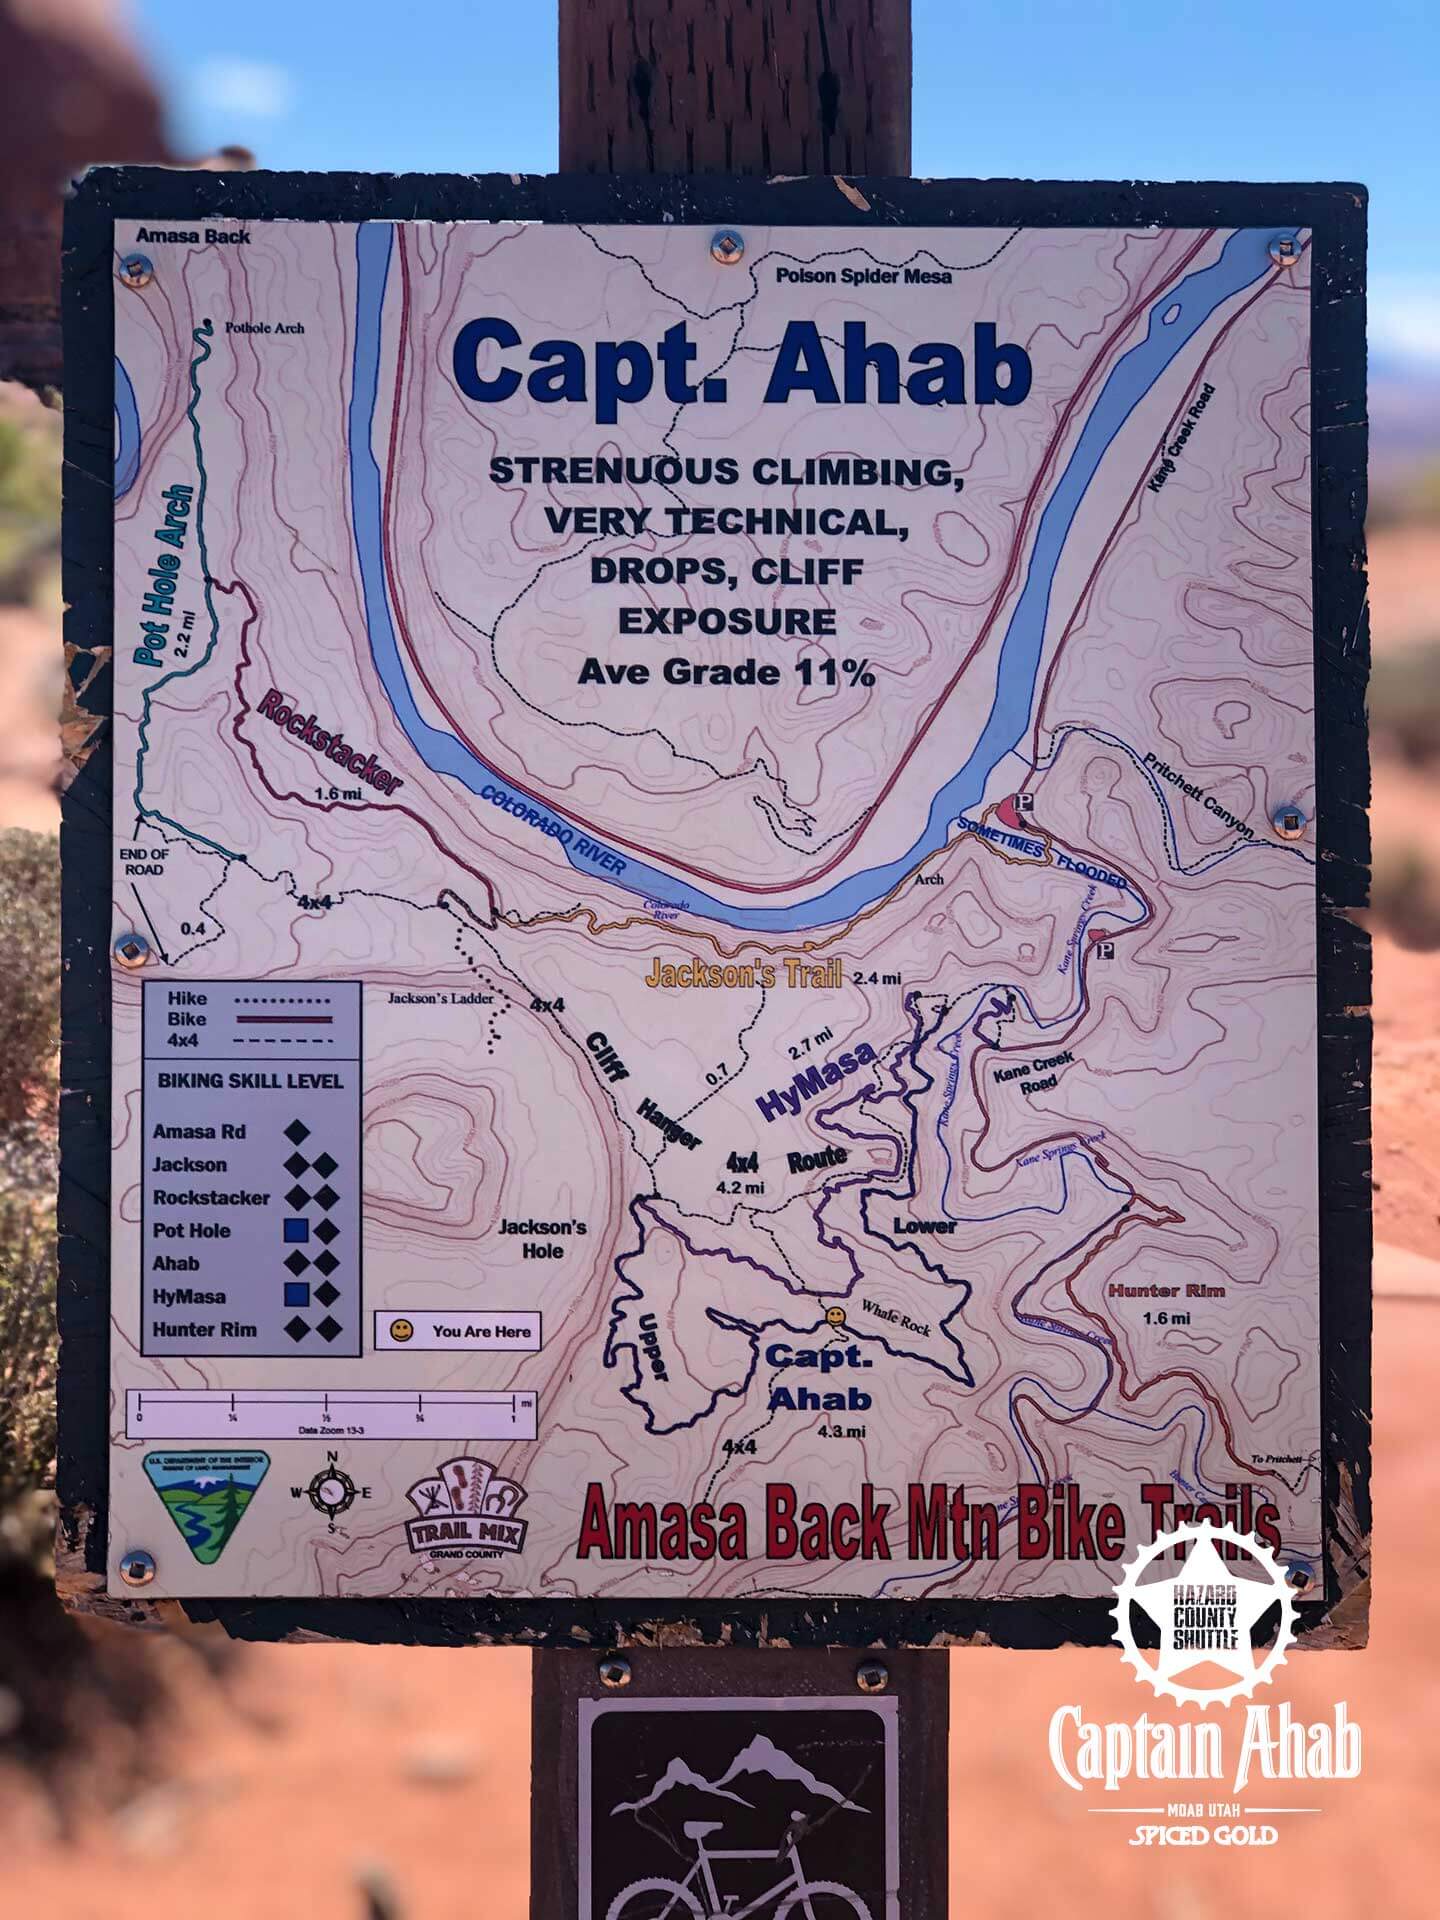 Photo of Captain Ahab Trail Marker Sign Moab